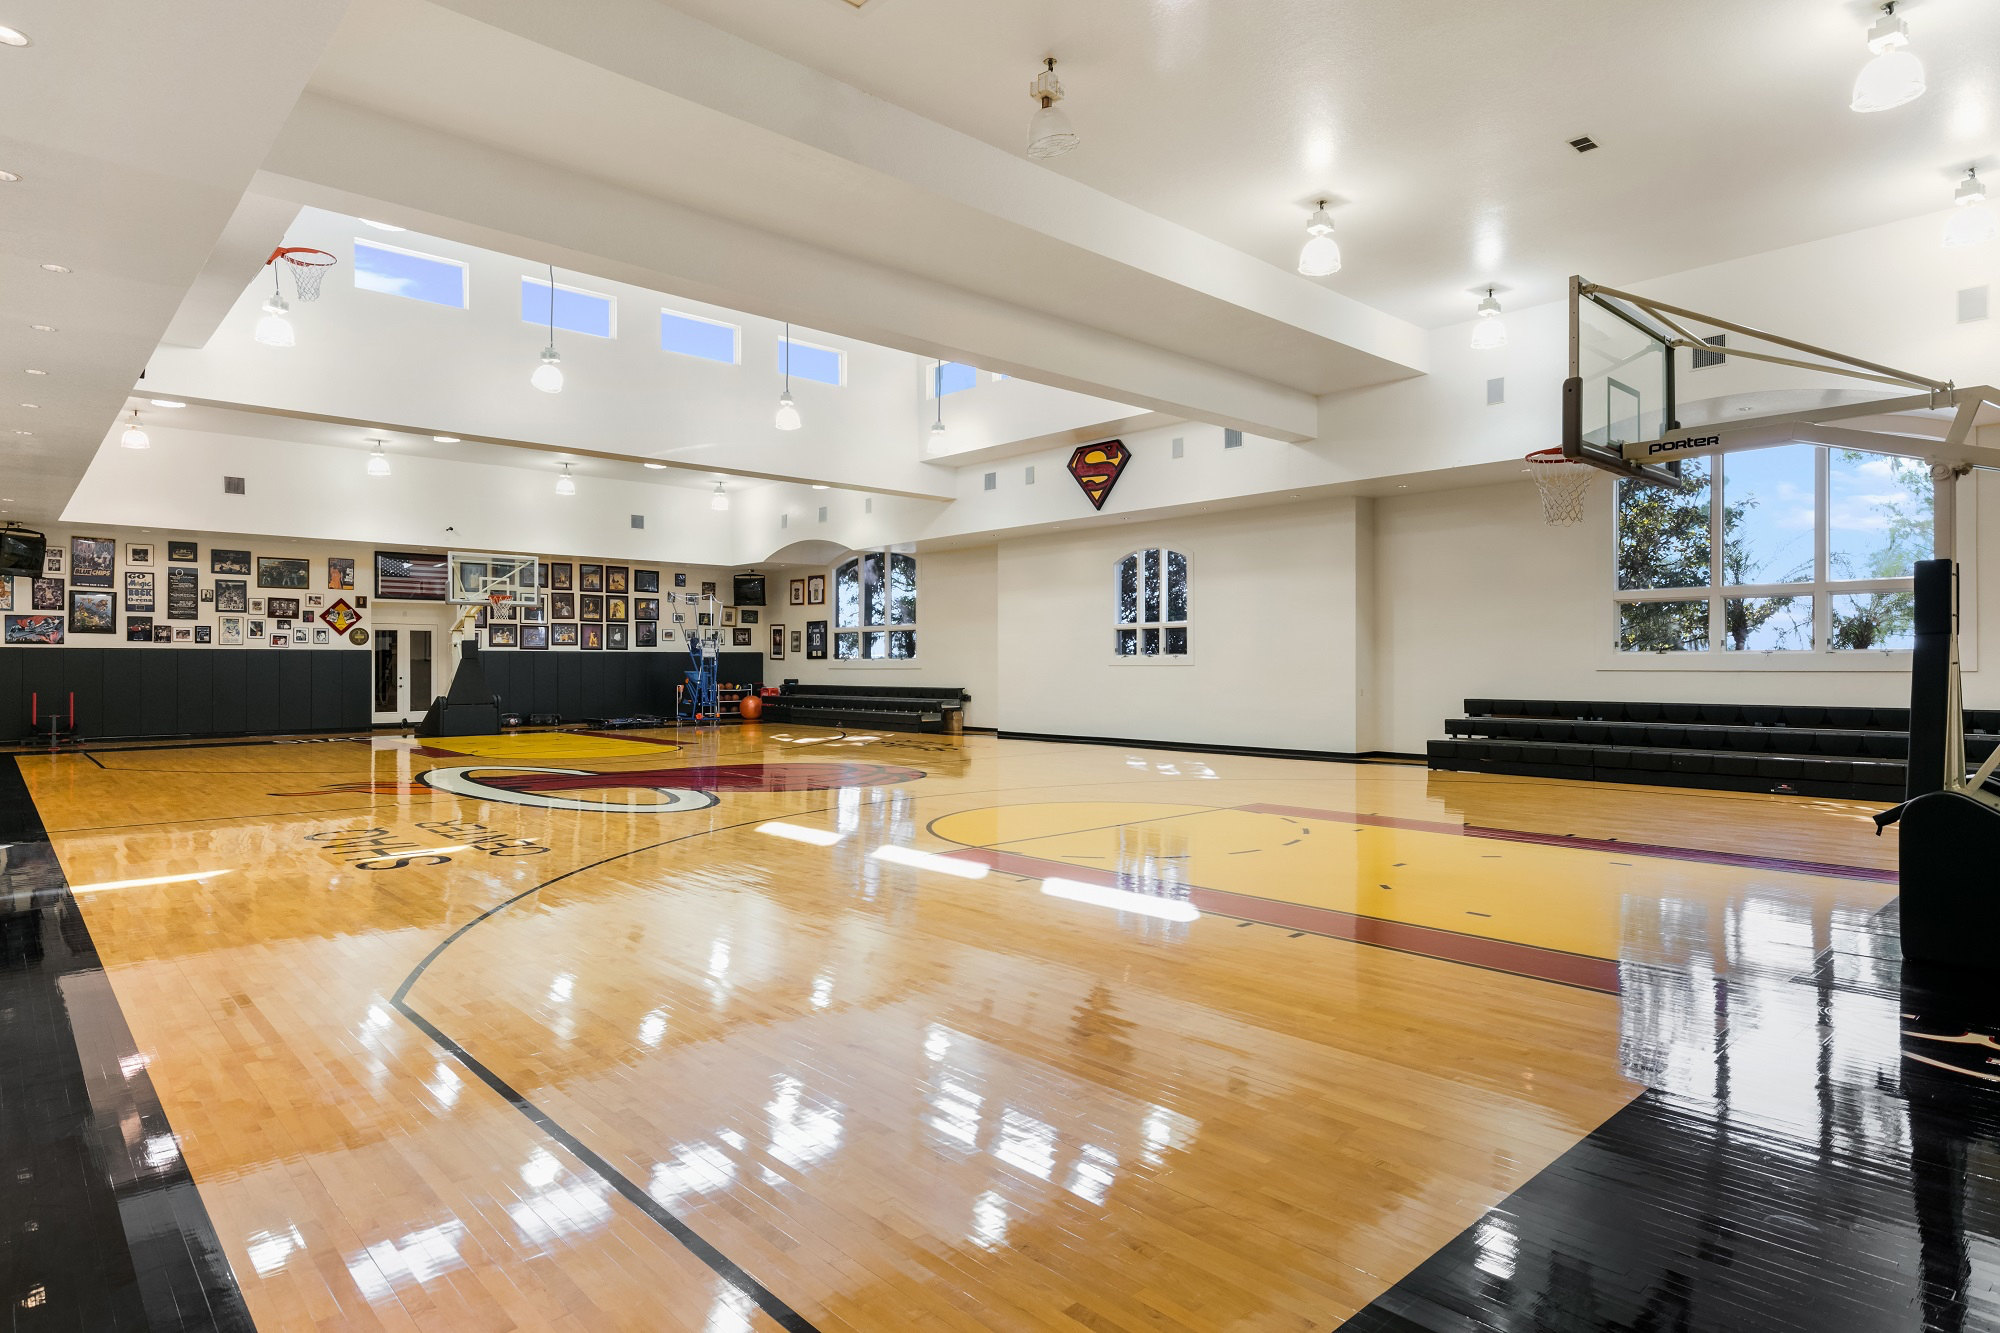 The home includes a 6,000-square-foot indoor basketball court.